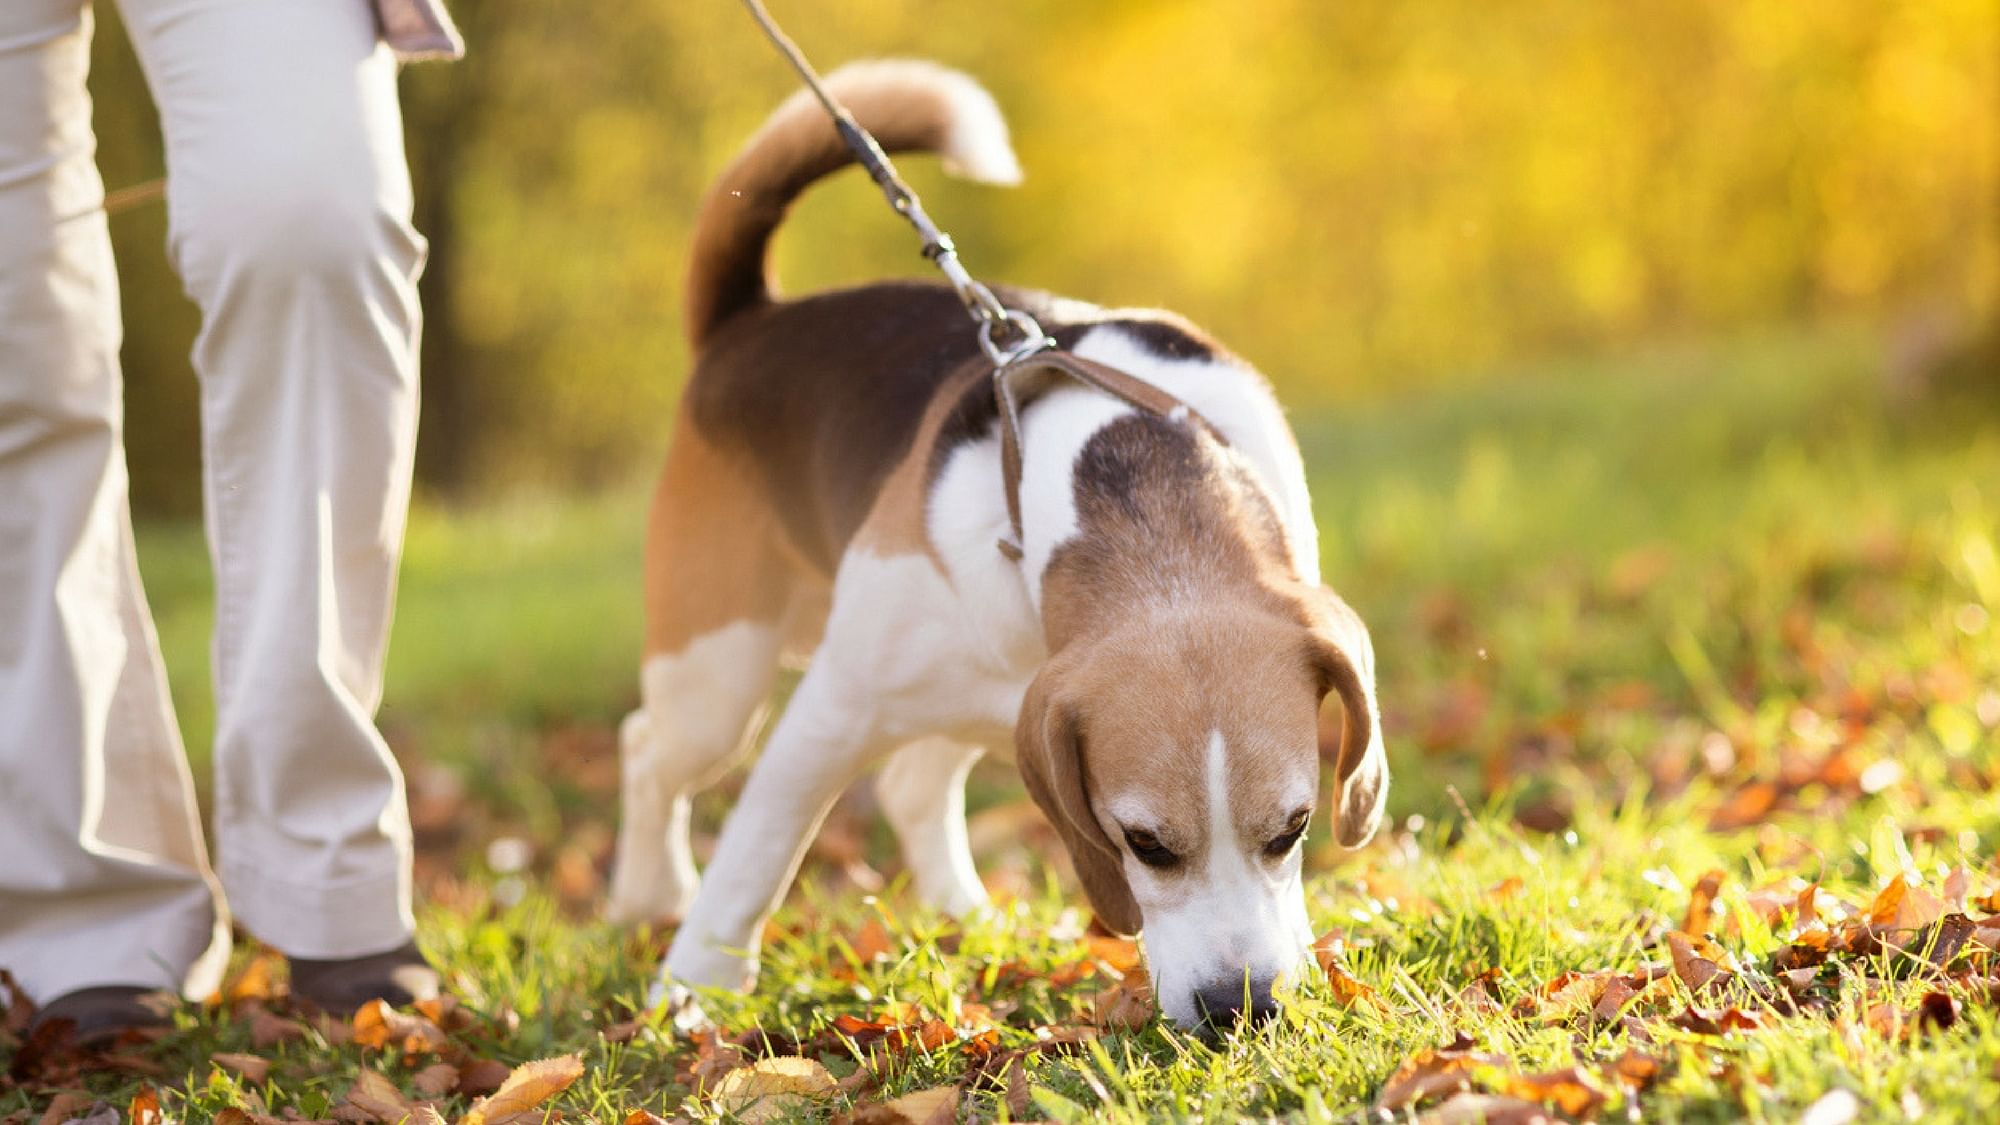 A University of Liverpool study concluded that people who regularly walk their dogs do it because that’s what makes them happy and not for any health and social benefit.